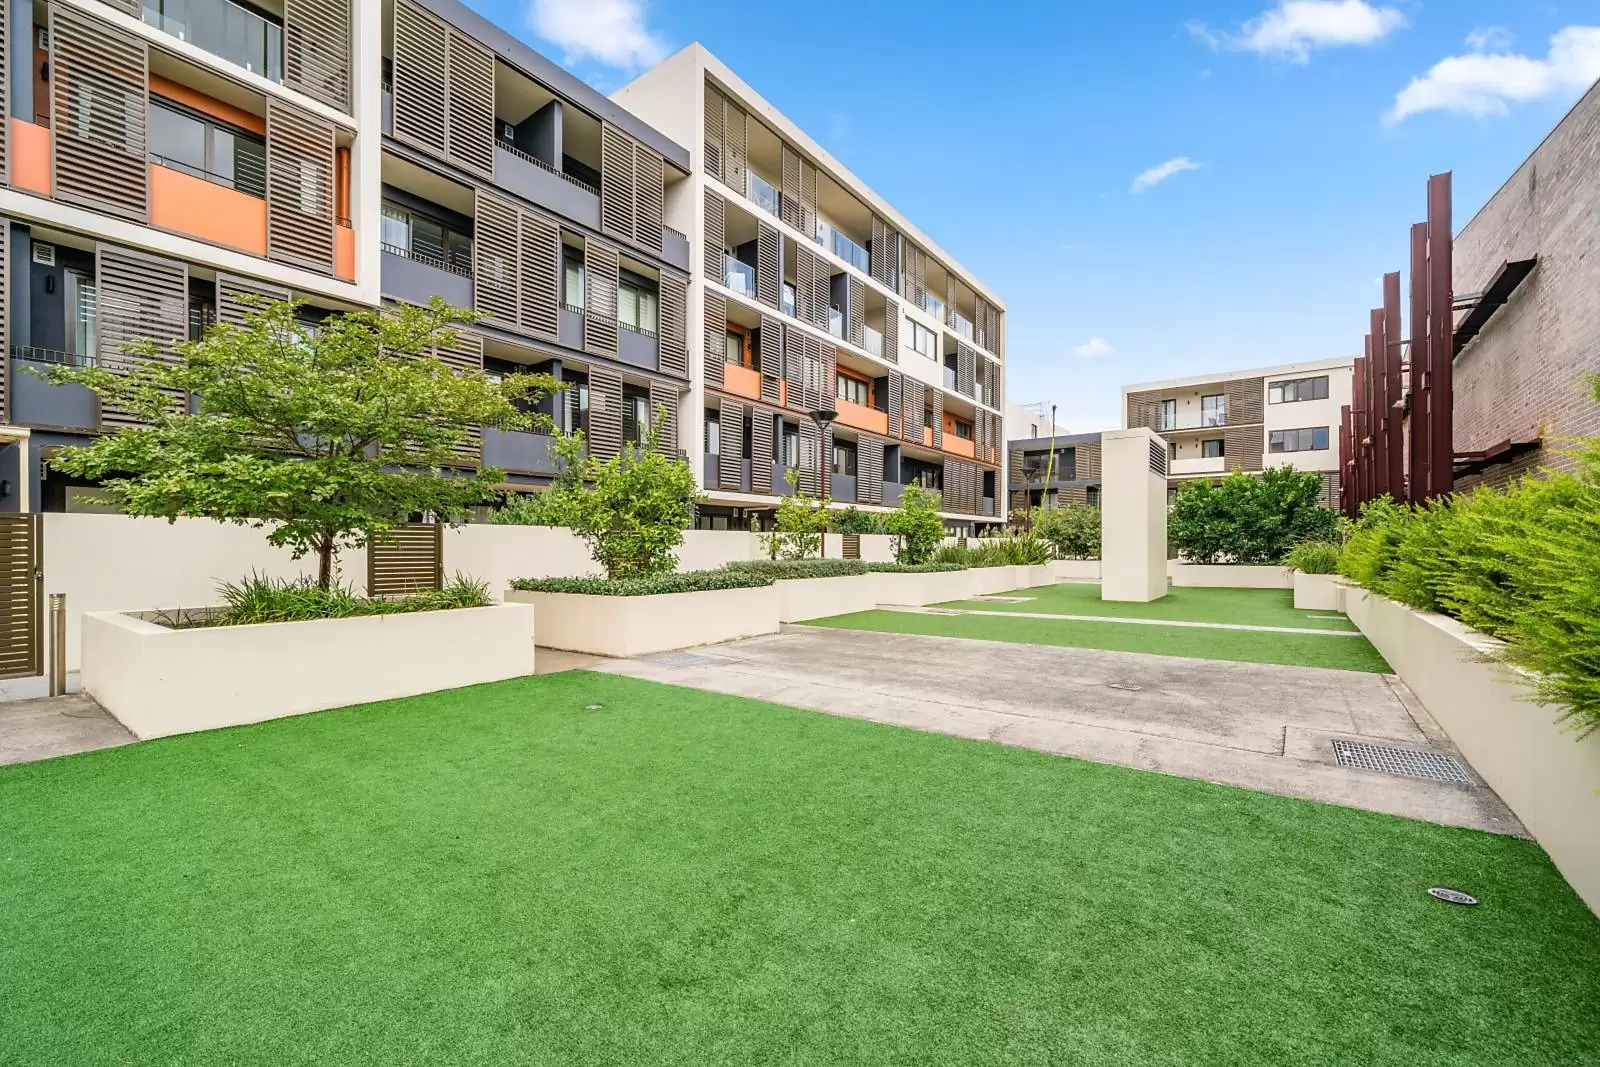 Photo #14: 305/39-47 Mentmore Avenue, Rosebery - Sold by Sydney Sotheby's International Realty